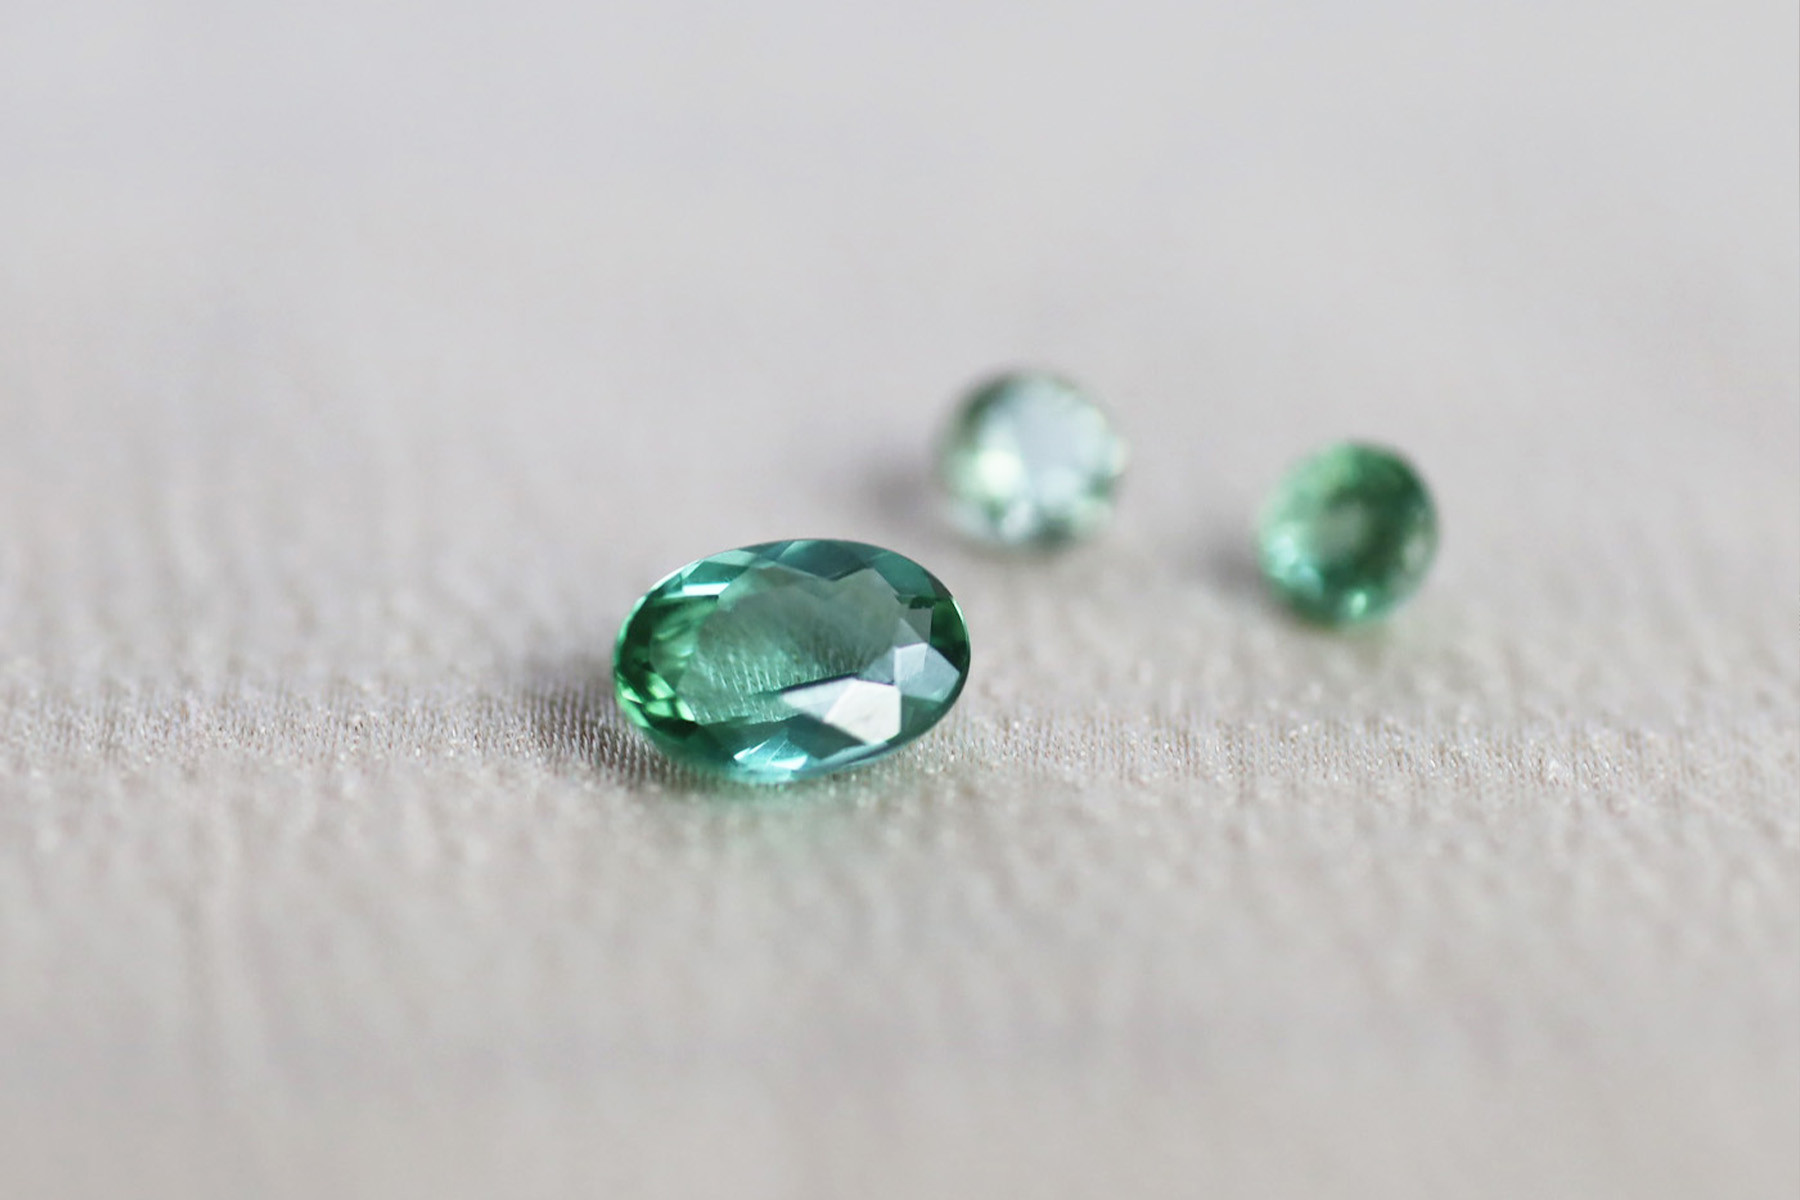 Our green gems